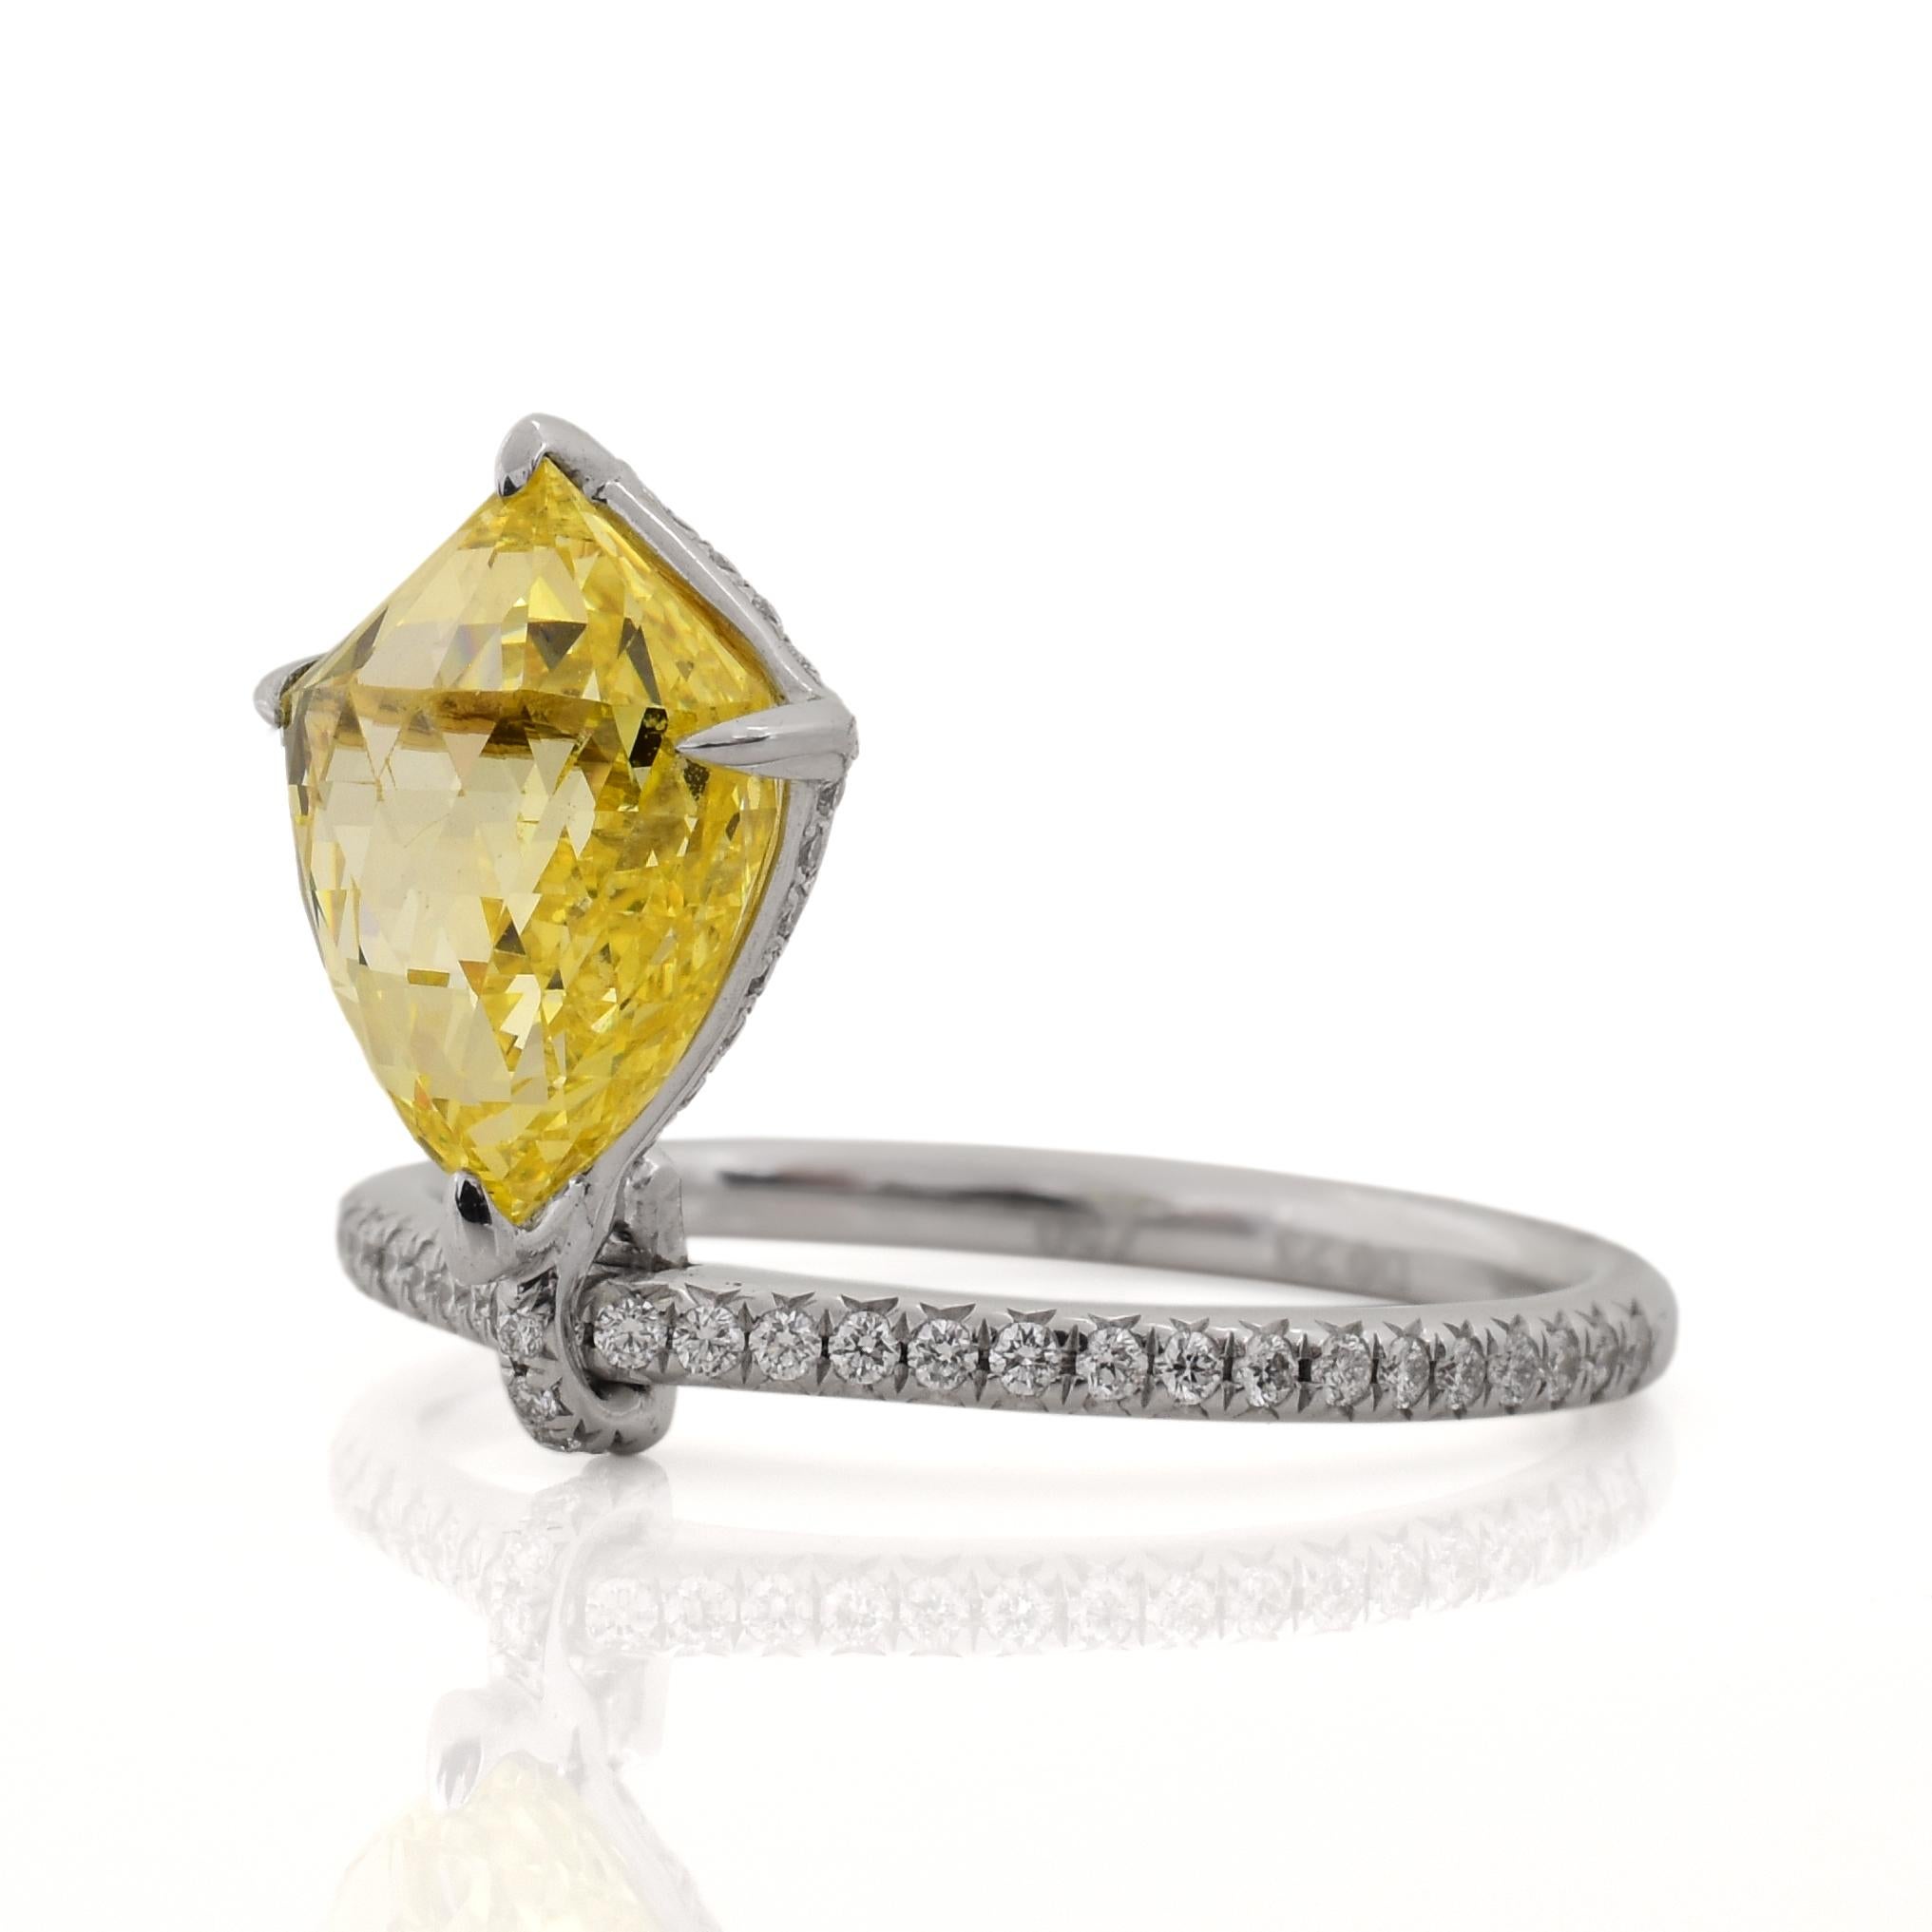 Very uniquely designed ring centering upon a 3.06ct GIA certified Fancy Intense Yellow Briollette center diamond (VS1 clarity). The ring contains approximately .50cts of round brilliant cut diamond sidestones on the shank and underneath the basket